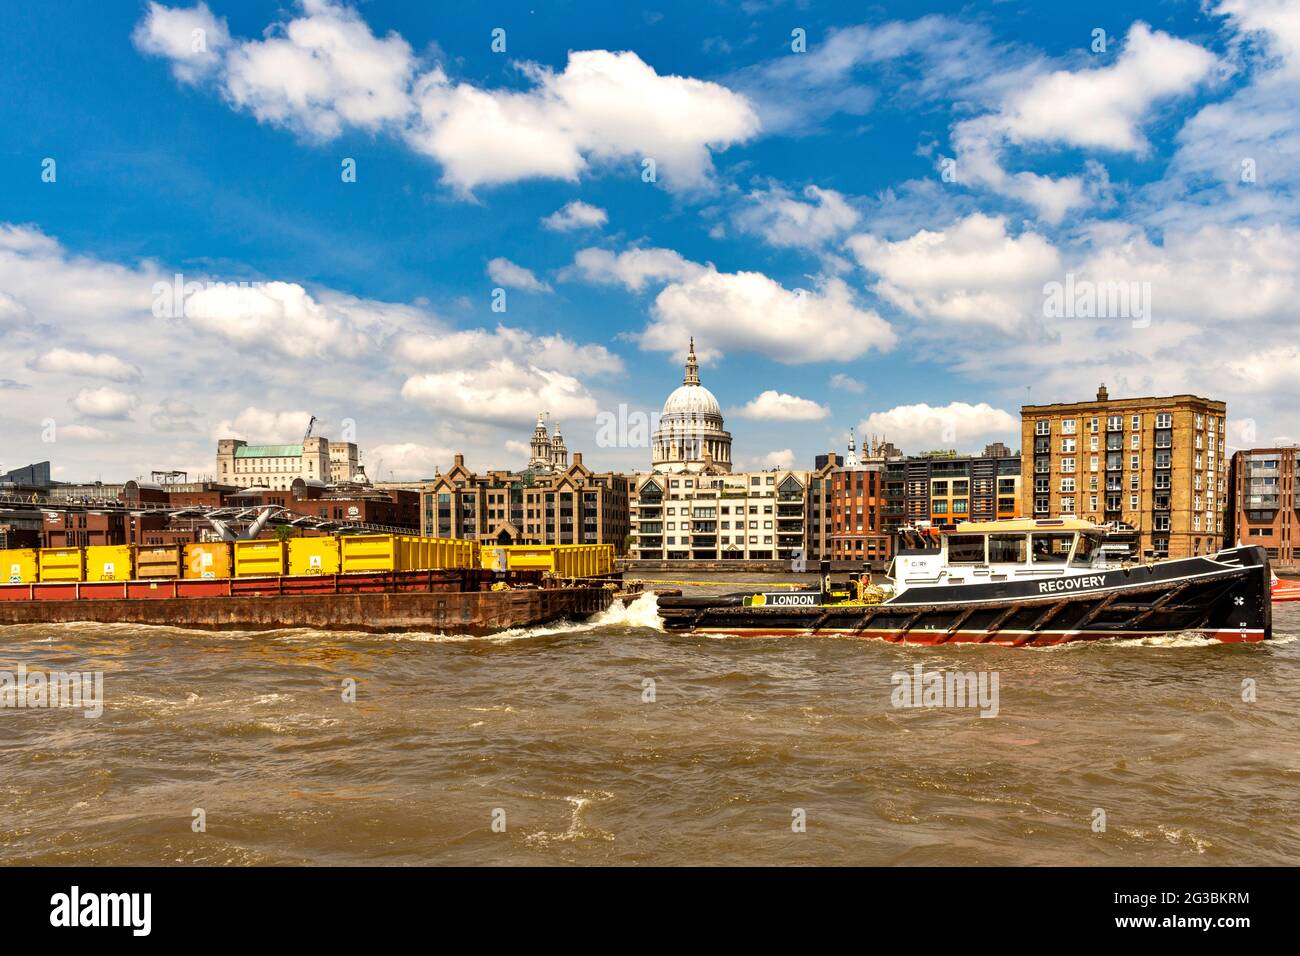 LONDON ENGLAND RIVER THAMES LONDON RECOVERY BOAT TOWING BARGE AND CONTAINERS ST. PAULS CATHEDRAL DOME IN THE BACKGROUND Stock Photo